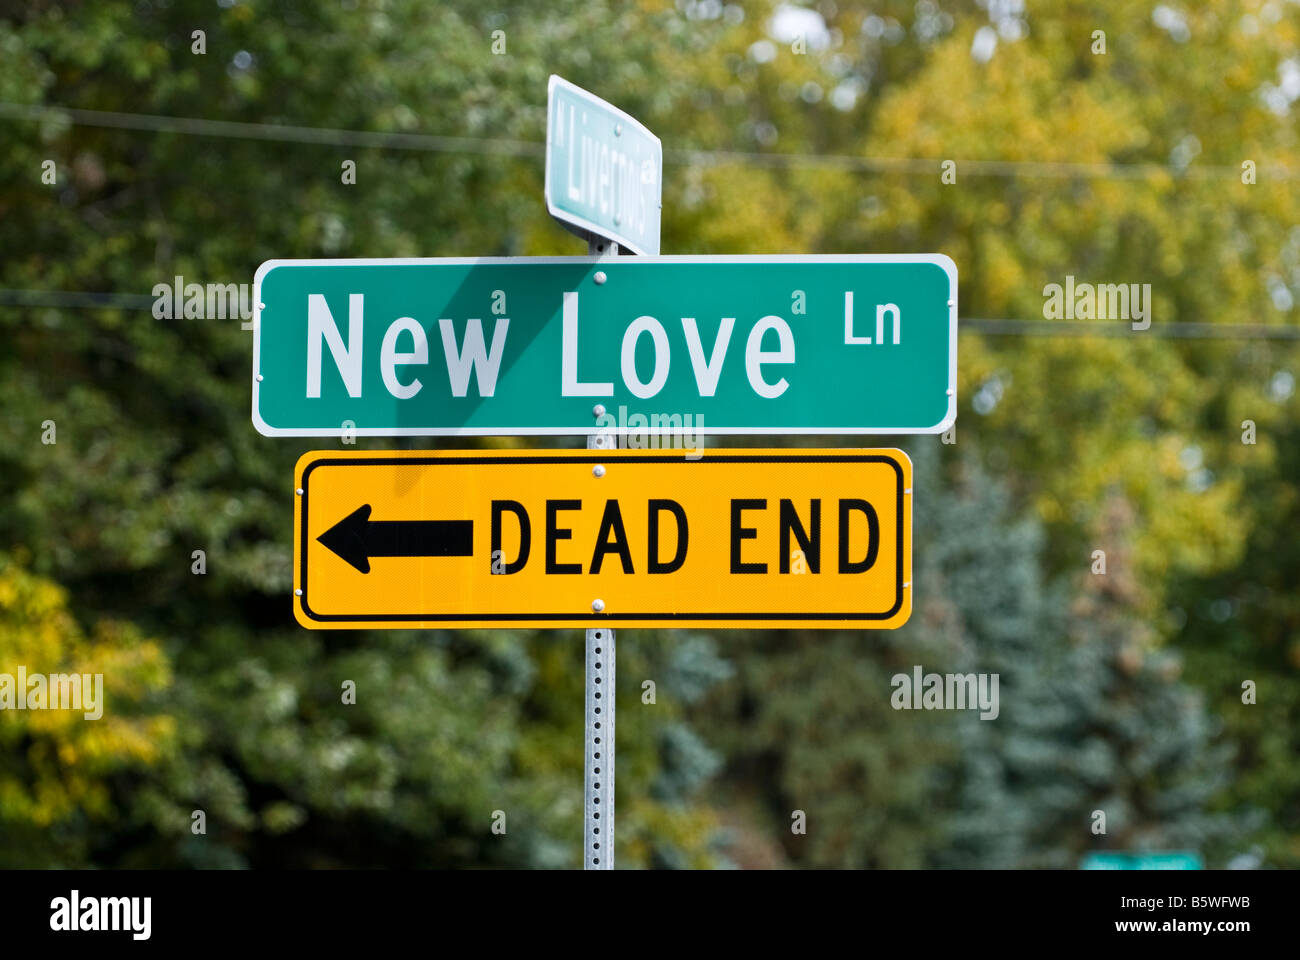 New Love sign with Dead end sign below arrow pointed left A funny wedding or engagement card Stock Photo